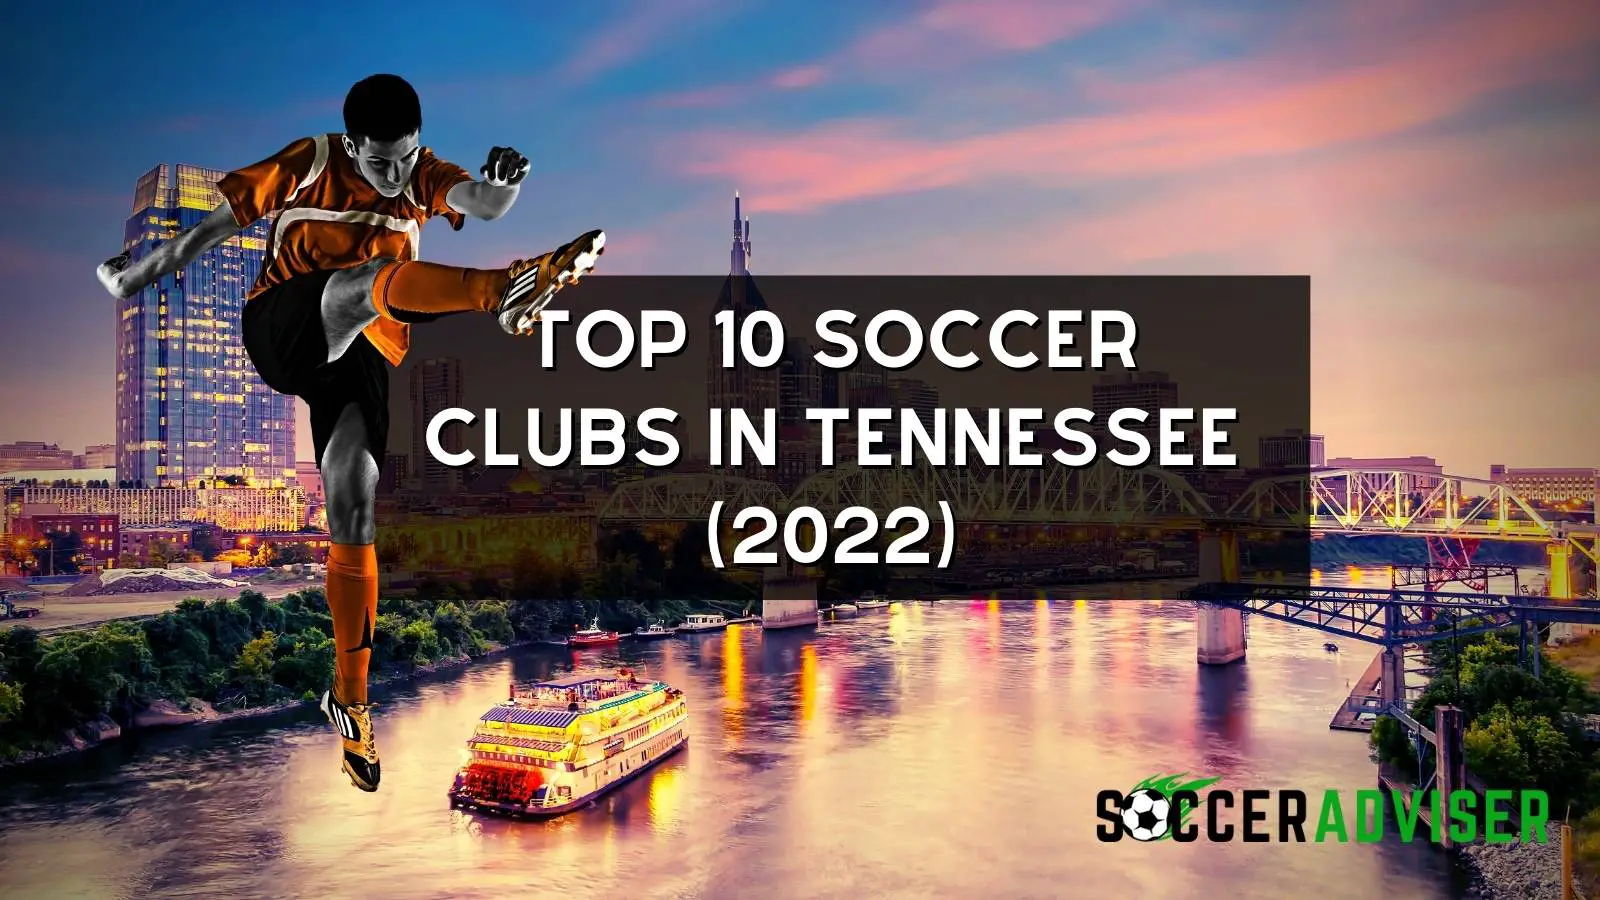 Top 10 Soccer Clubs In Tennessee – (2022) Guide